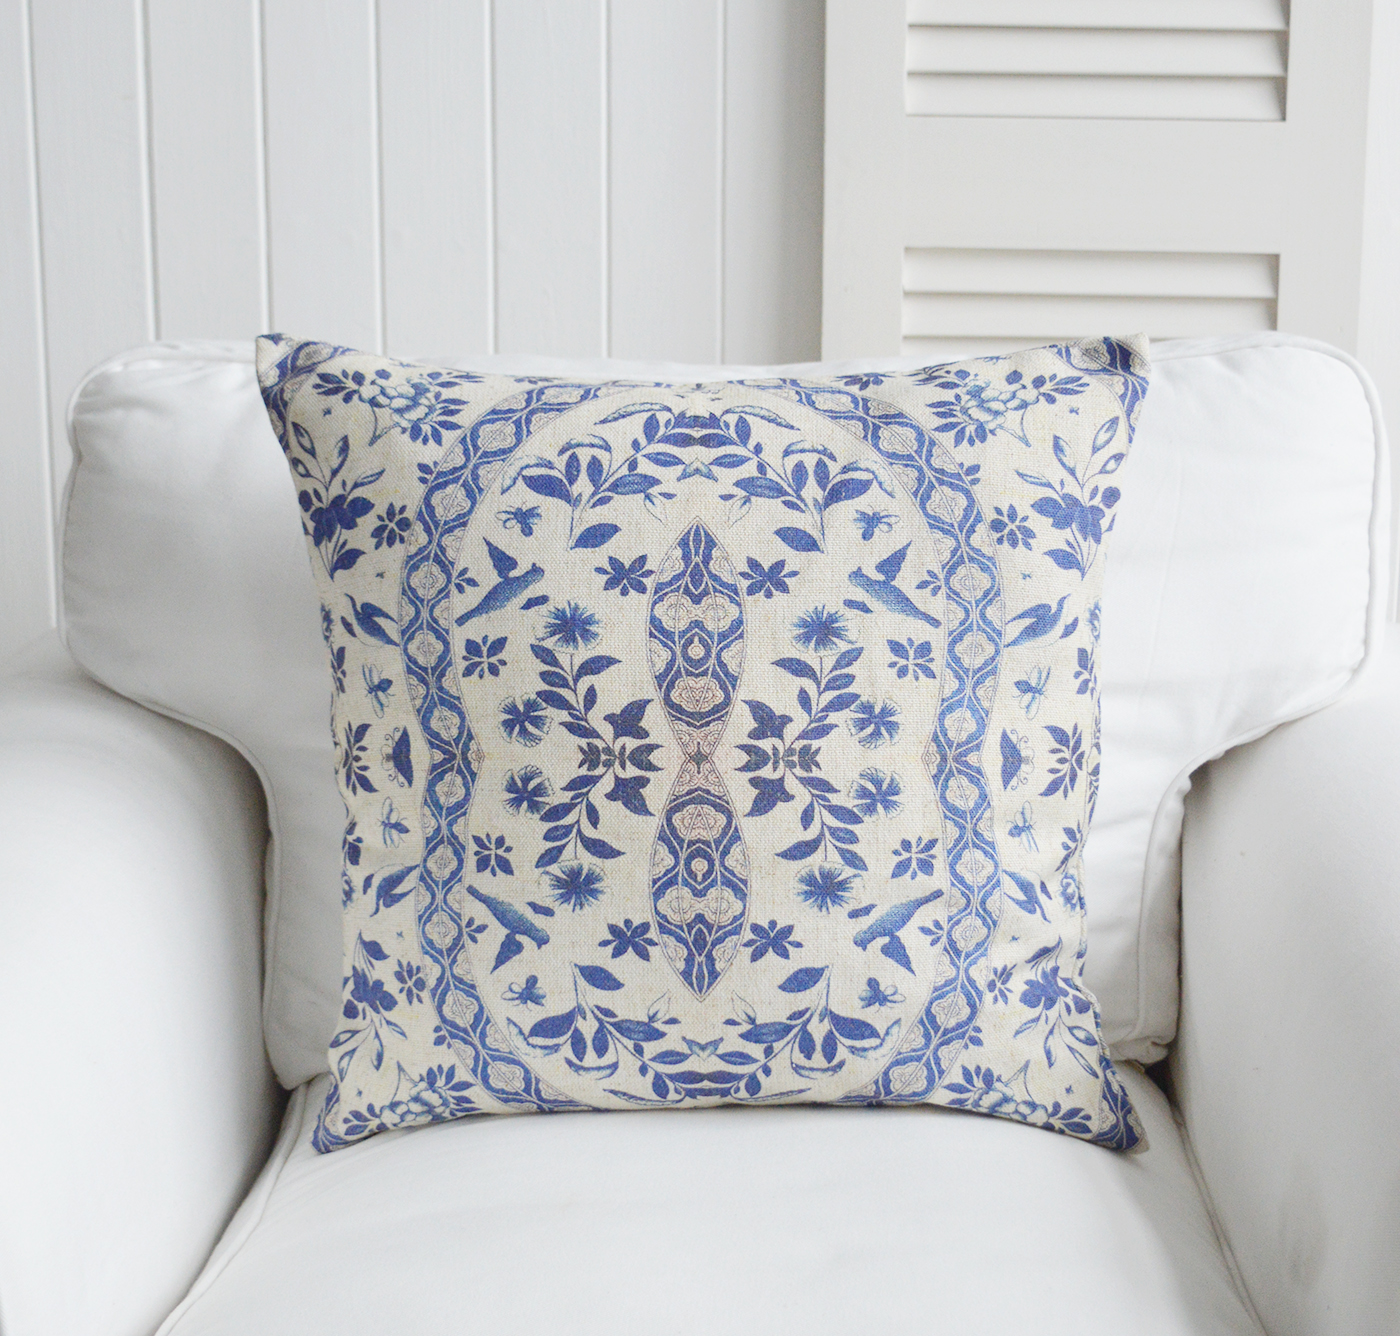 Williston navy vintage style cushions for New England  country farmhouse and coastal furniture and interiors